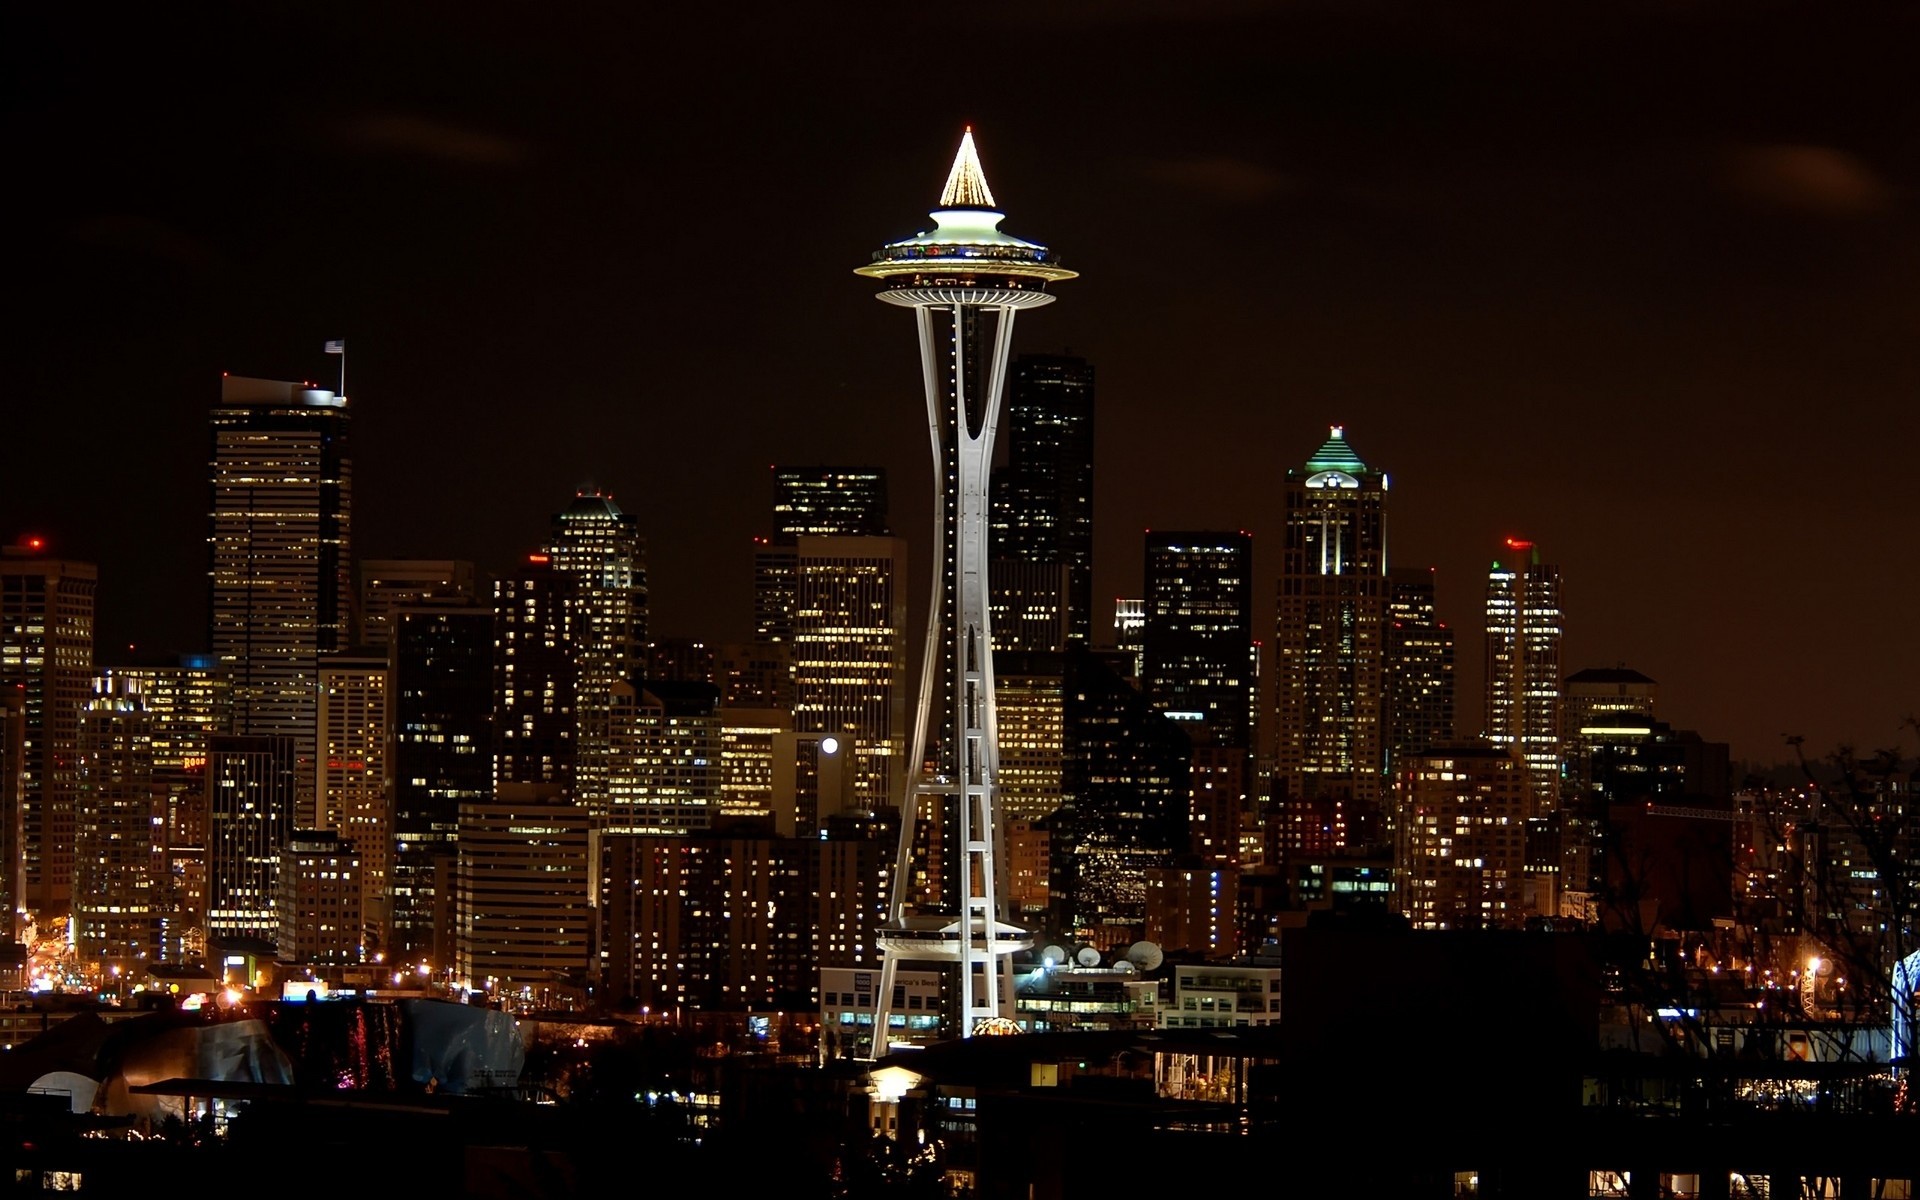 Seattle Space Needle At Night - Seattle - 1920x1200 Wallpaper 